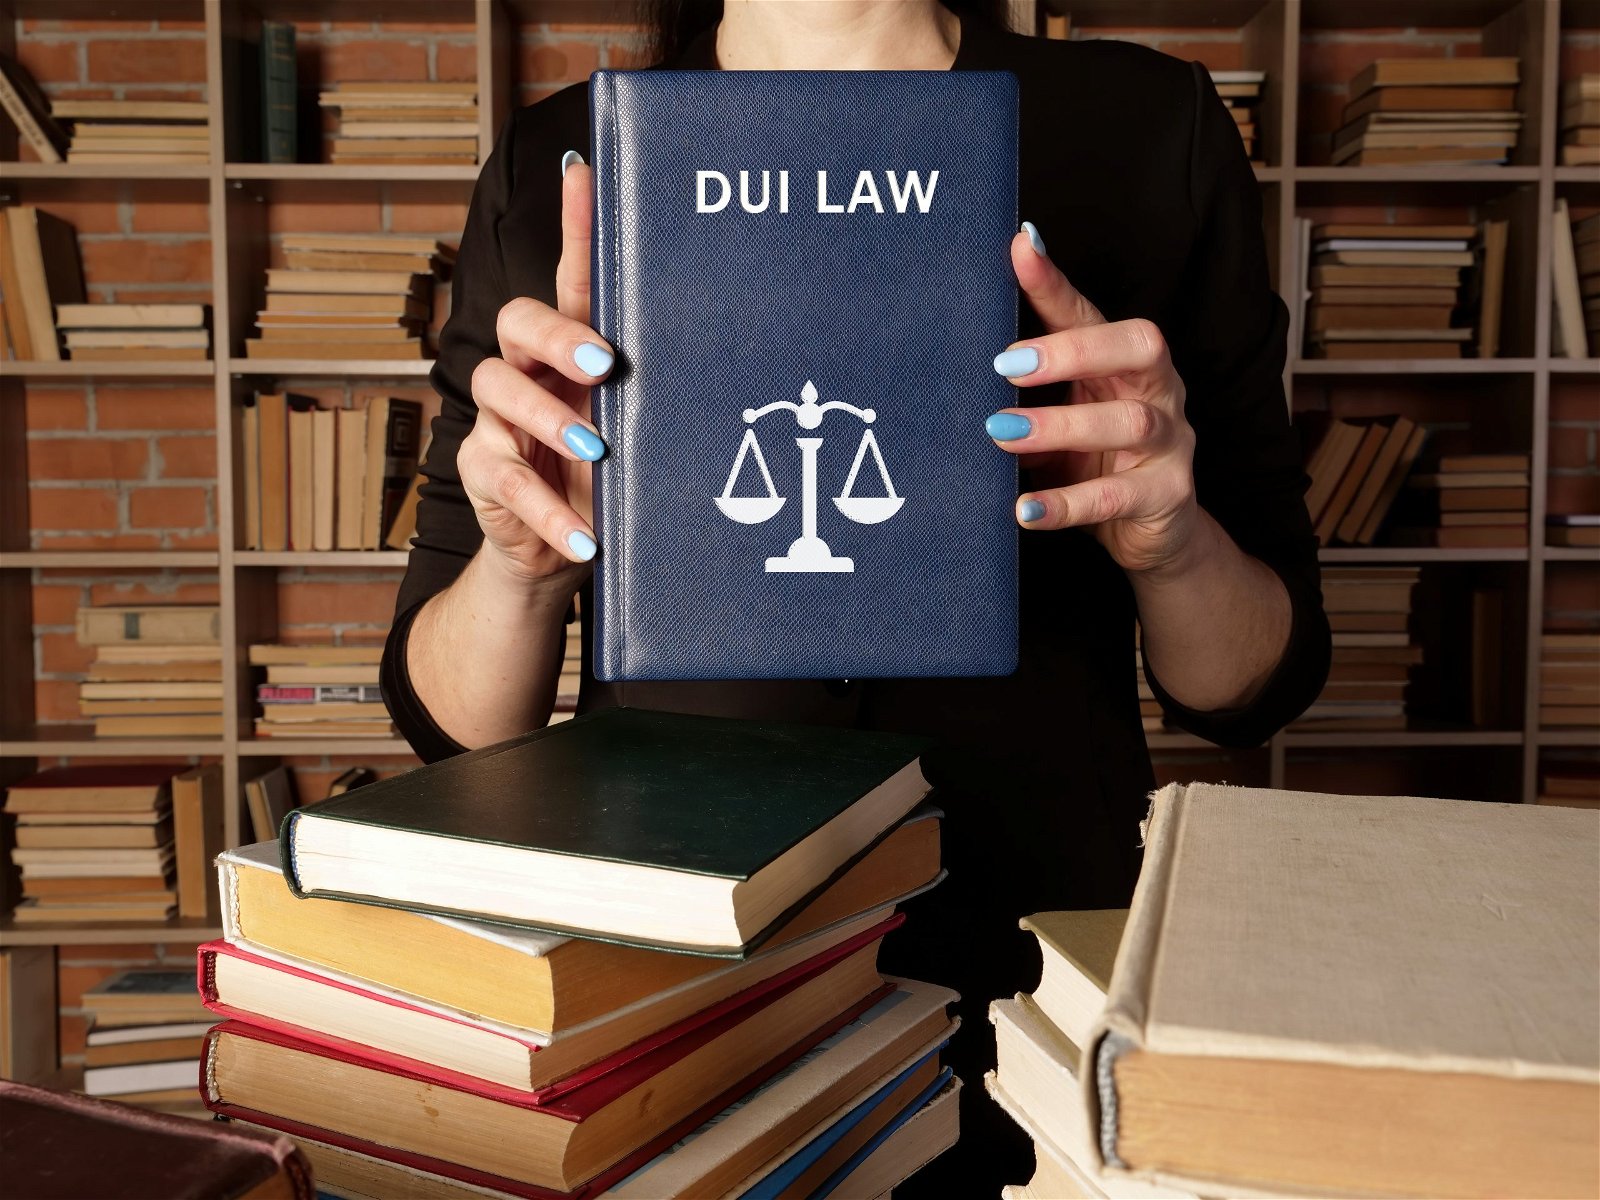 Lawyer holds DUI LAW book. Among other names, the criminal offense of drunk driving may be called driving under the influence